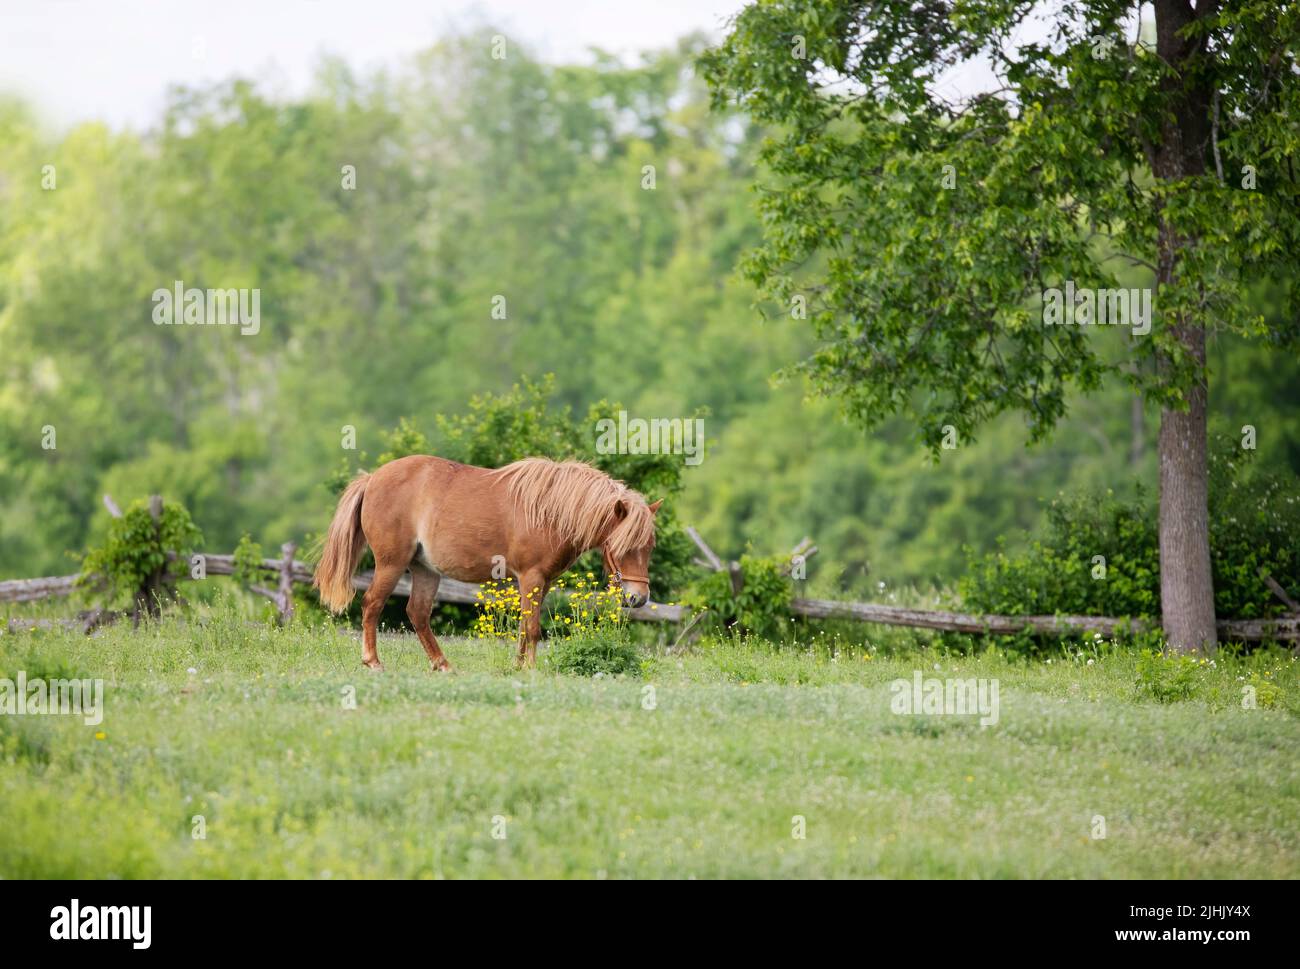 A beautiful brown horse standing in a grassy field with buttercups all around. Stock Photo